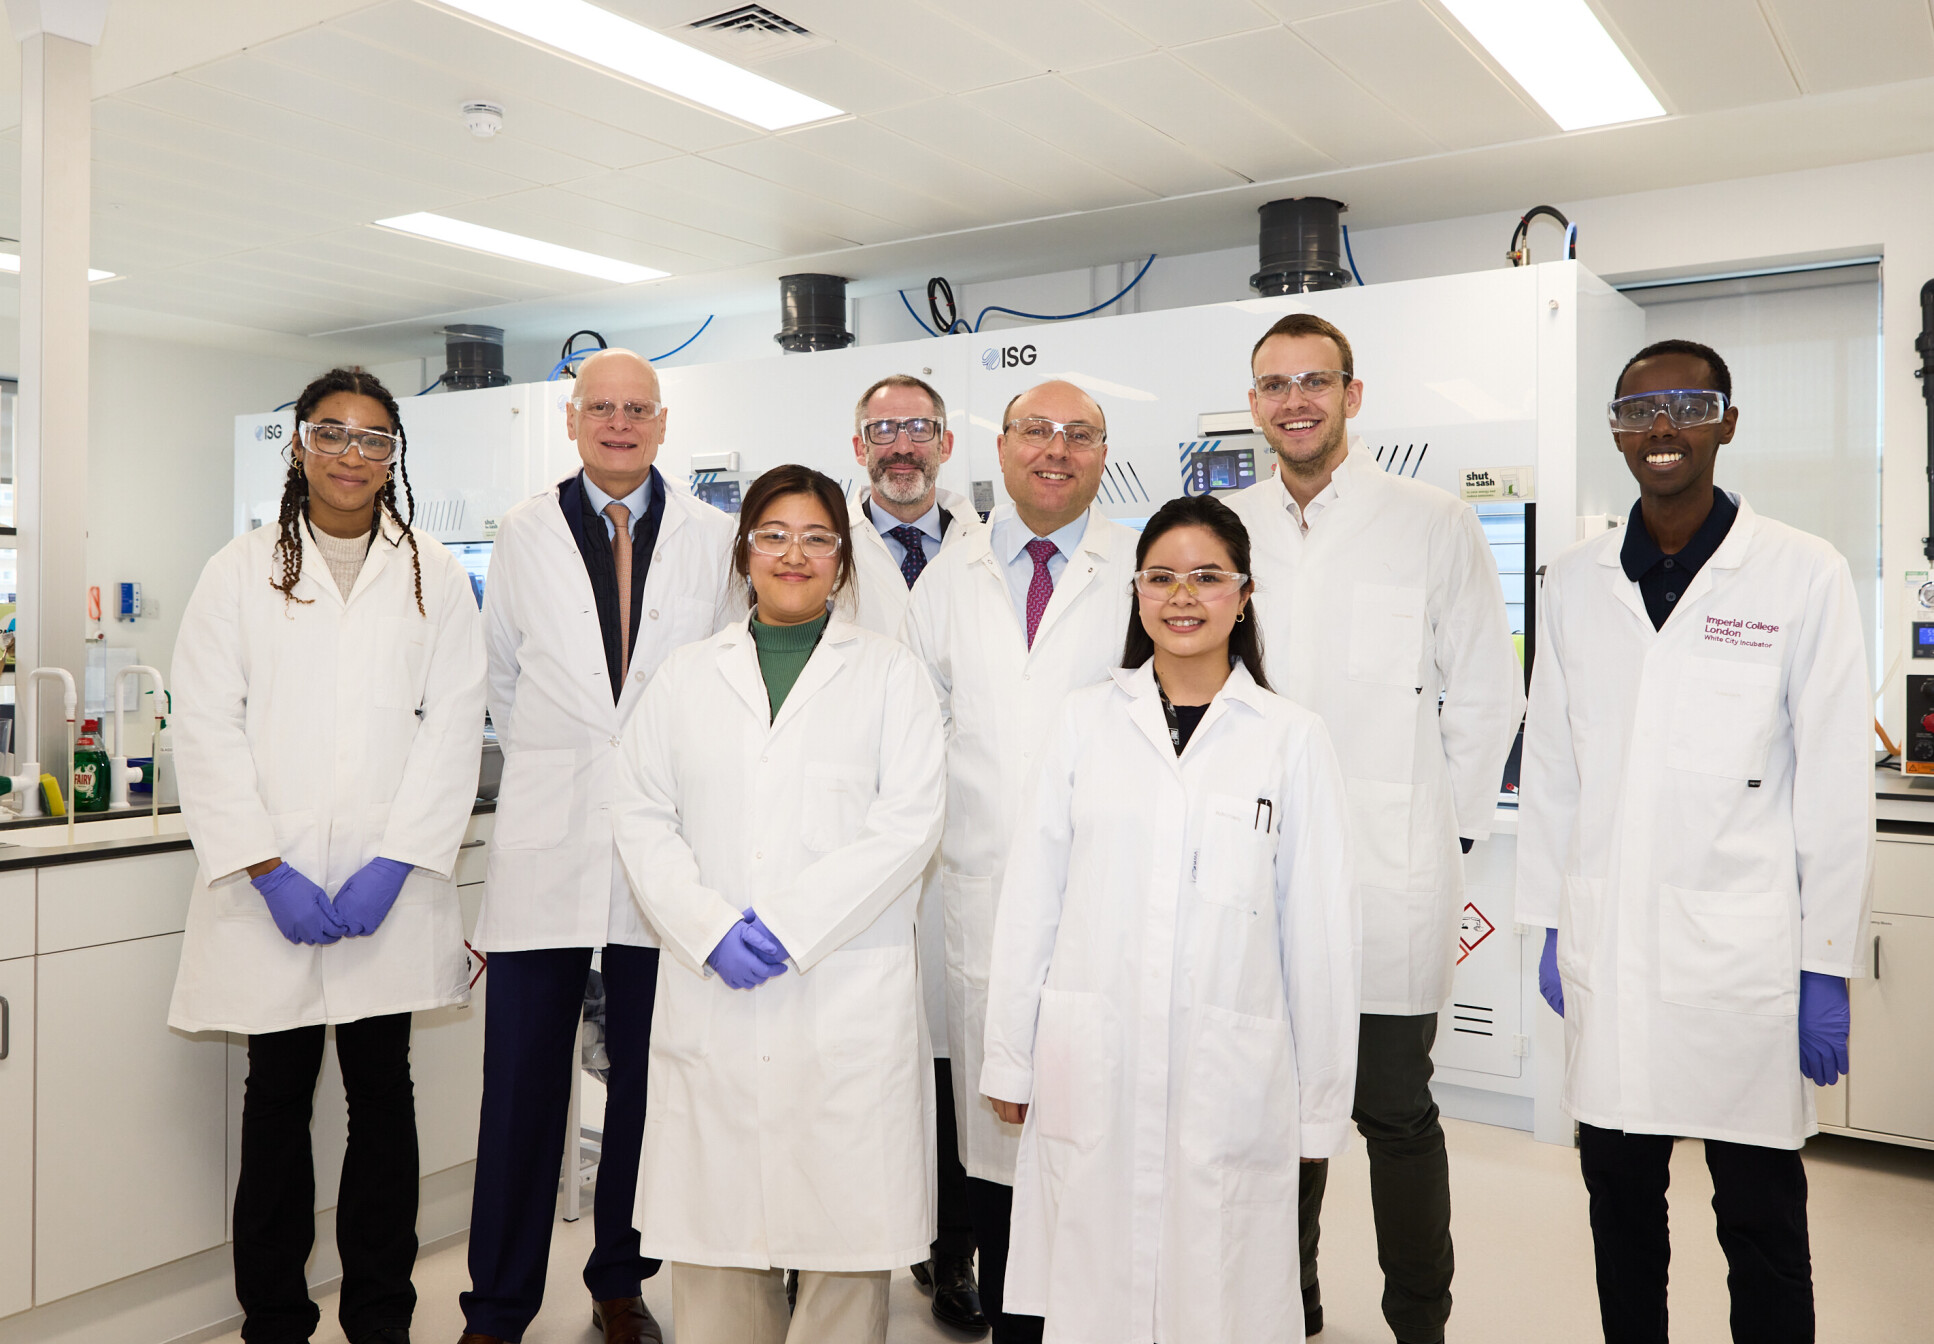 Minister Andrew Griffith MP, Professor Ian Walmsley and Professor Peter Haynes pictured smiling with the Puraffinity team in their research facilities